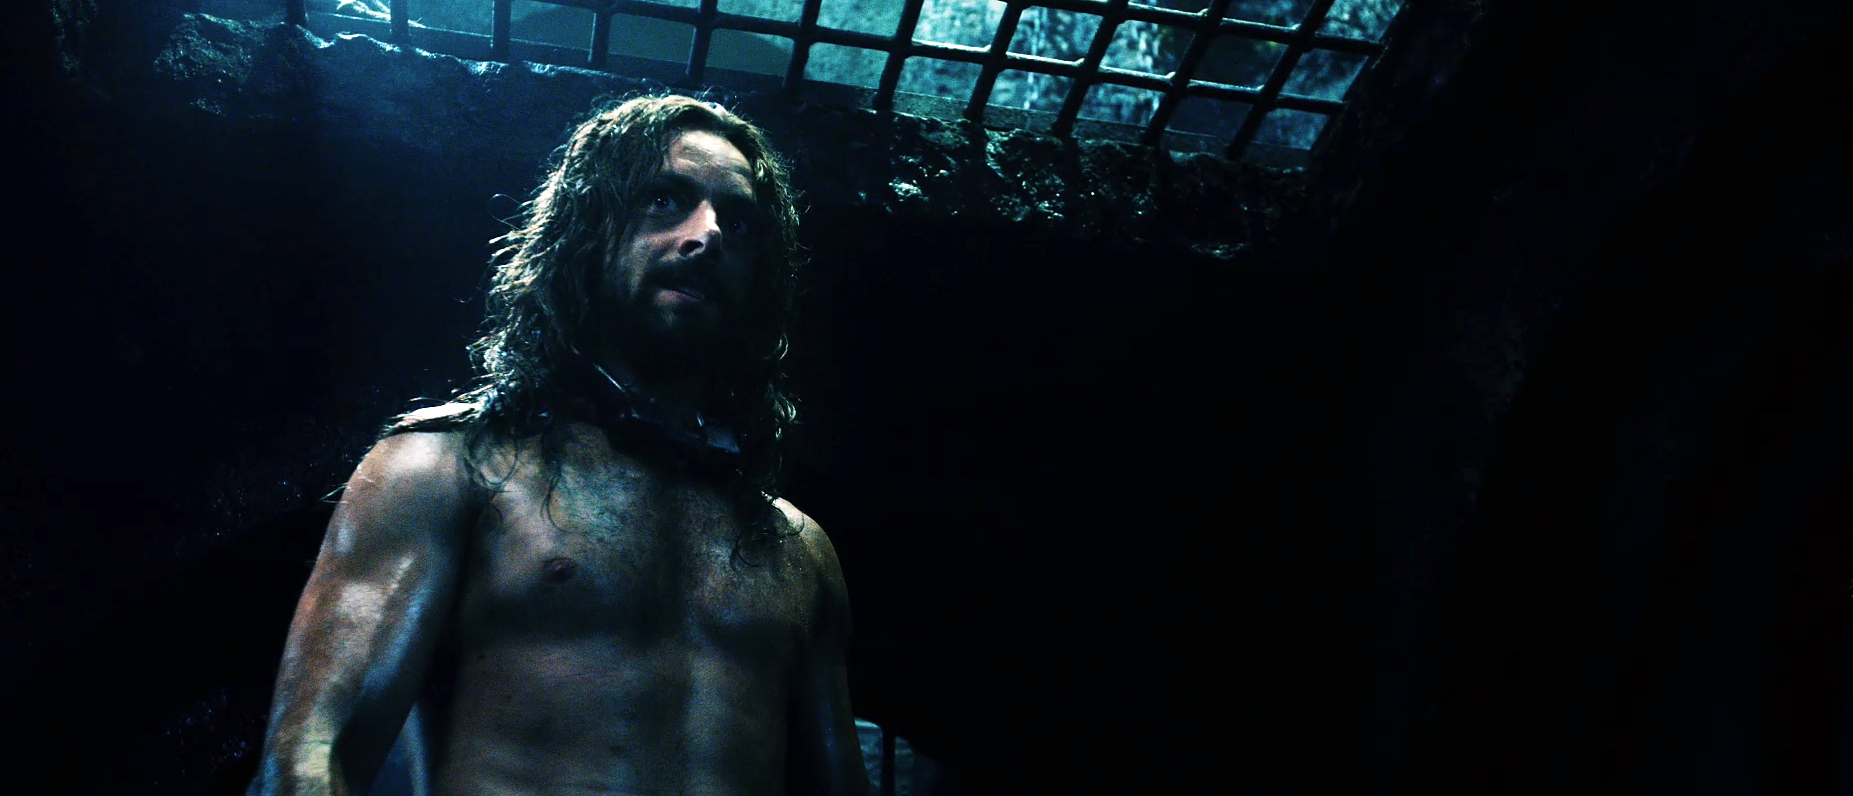 Underworld-Rise-of-the-Lycans-screencaps